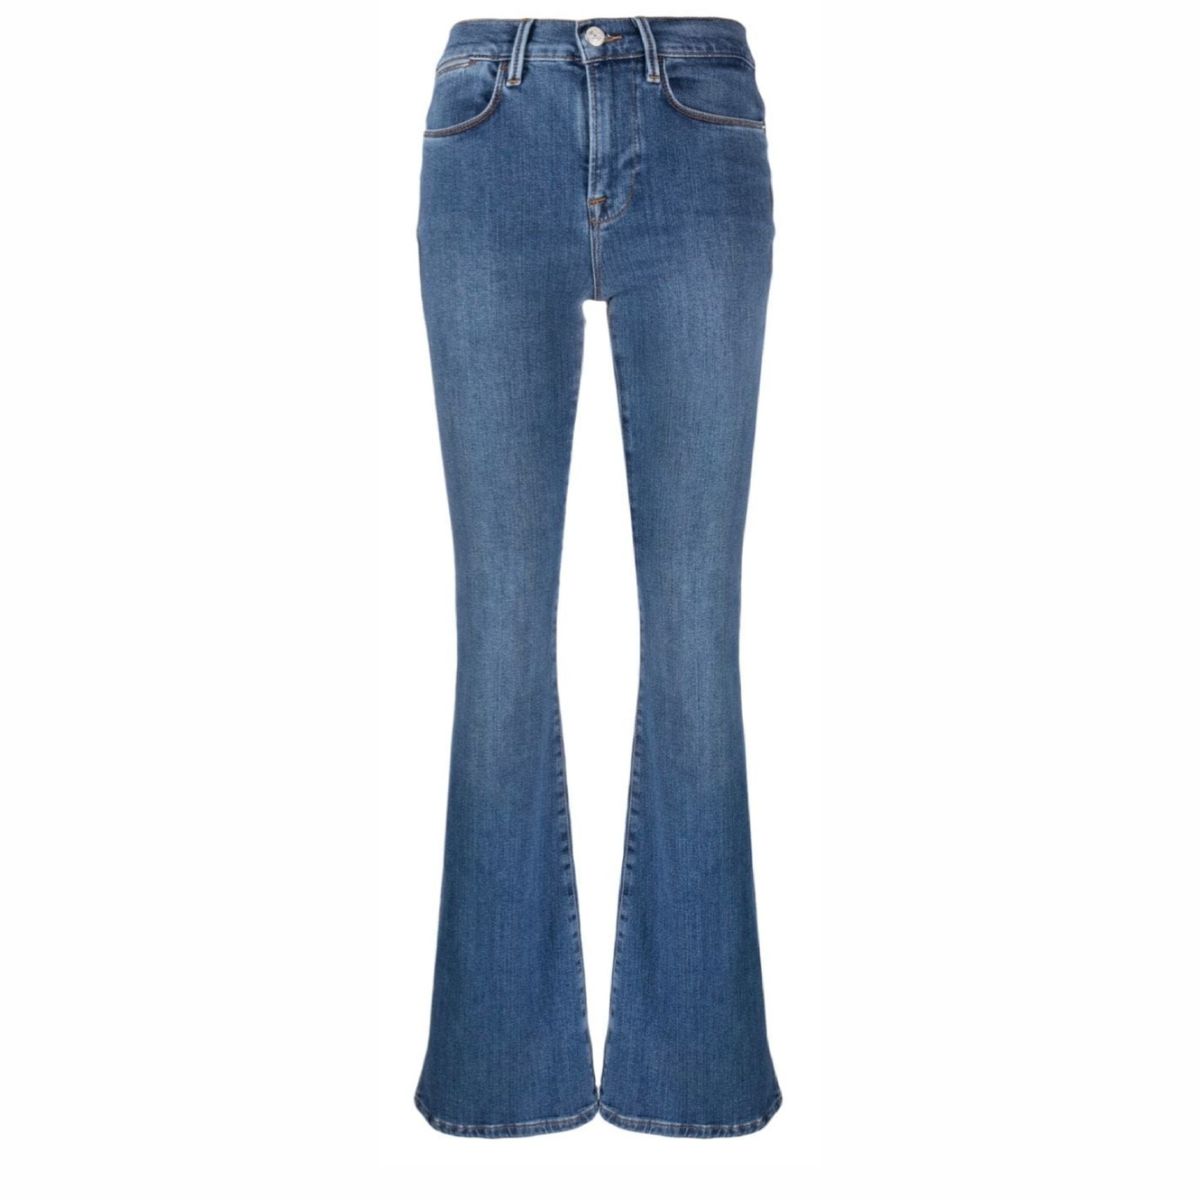 Hamba Jeans Women Stretch denim Fitted Trumpet Jeans | Shop Today. Get ...